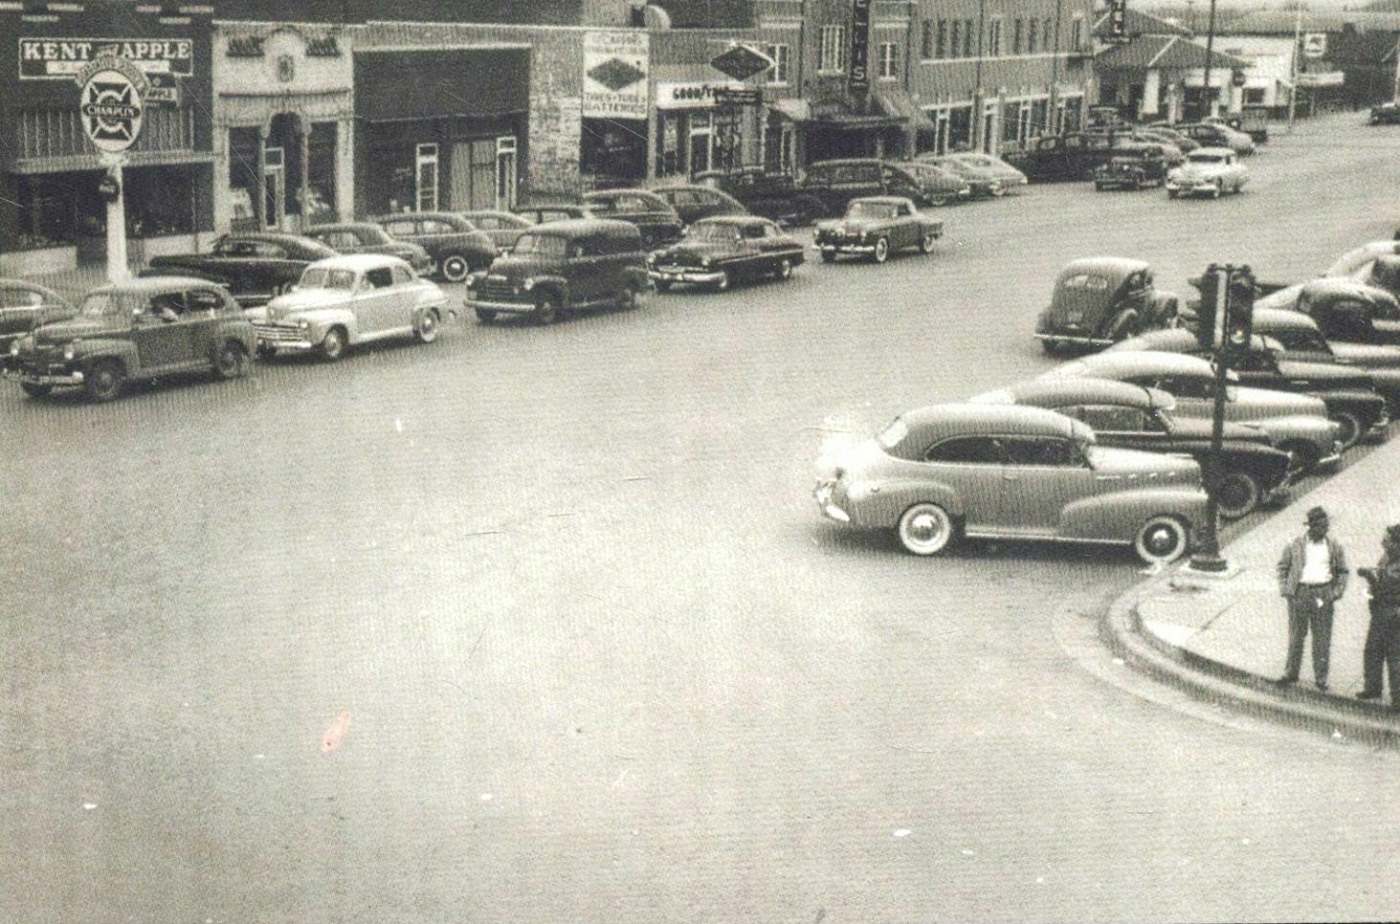 Downtown Perryton in 1940s